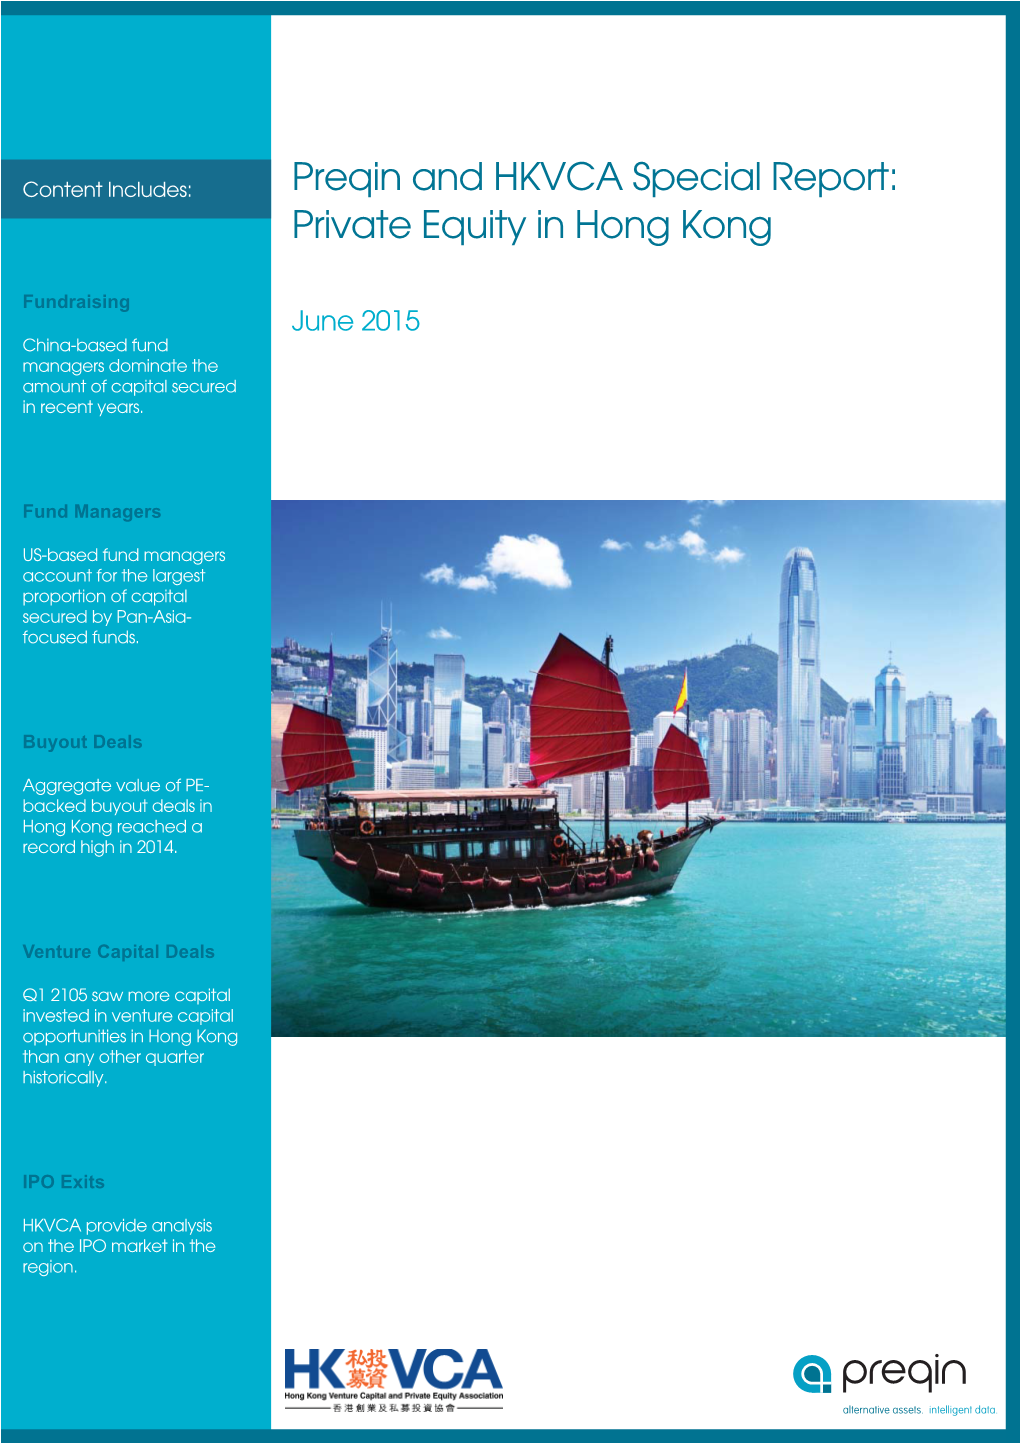 Preqin and HKVCA Special Report: Private Equity in Hong Kong